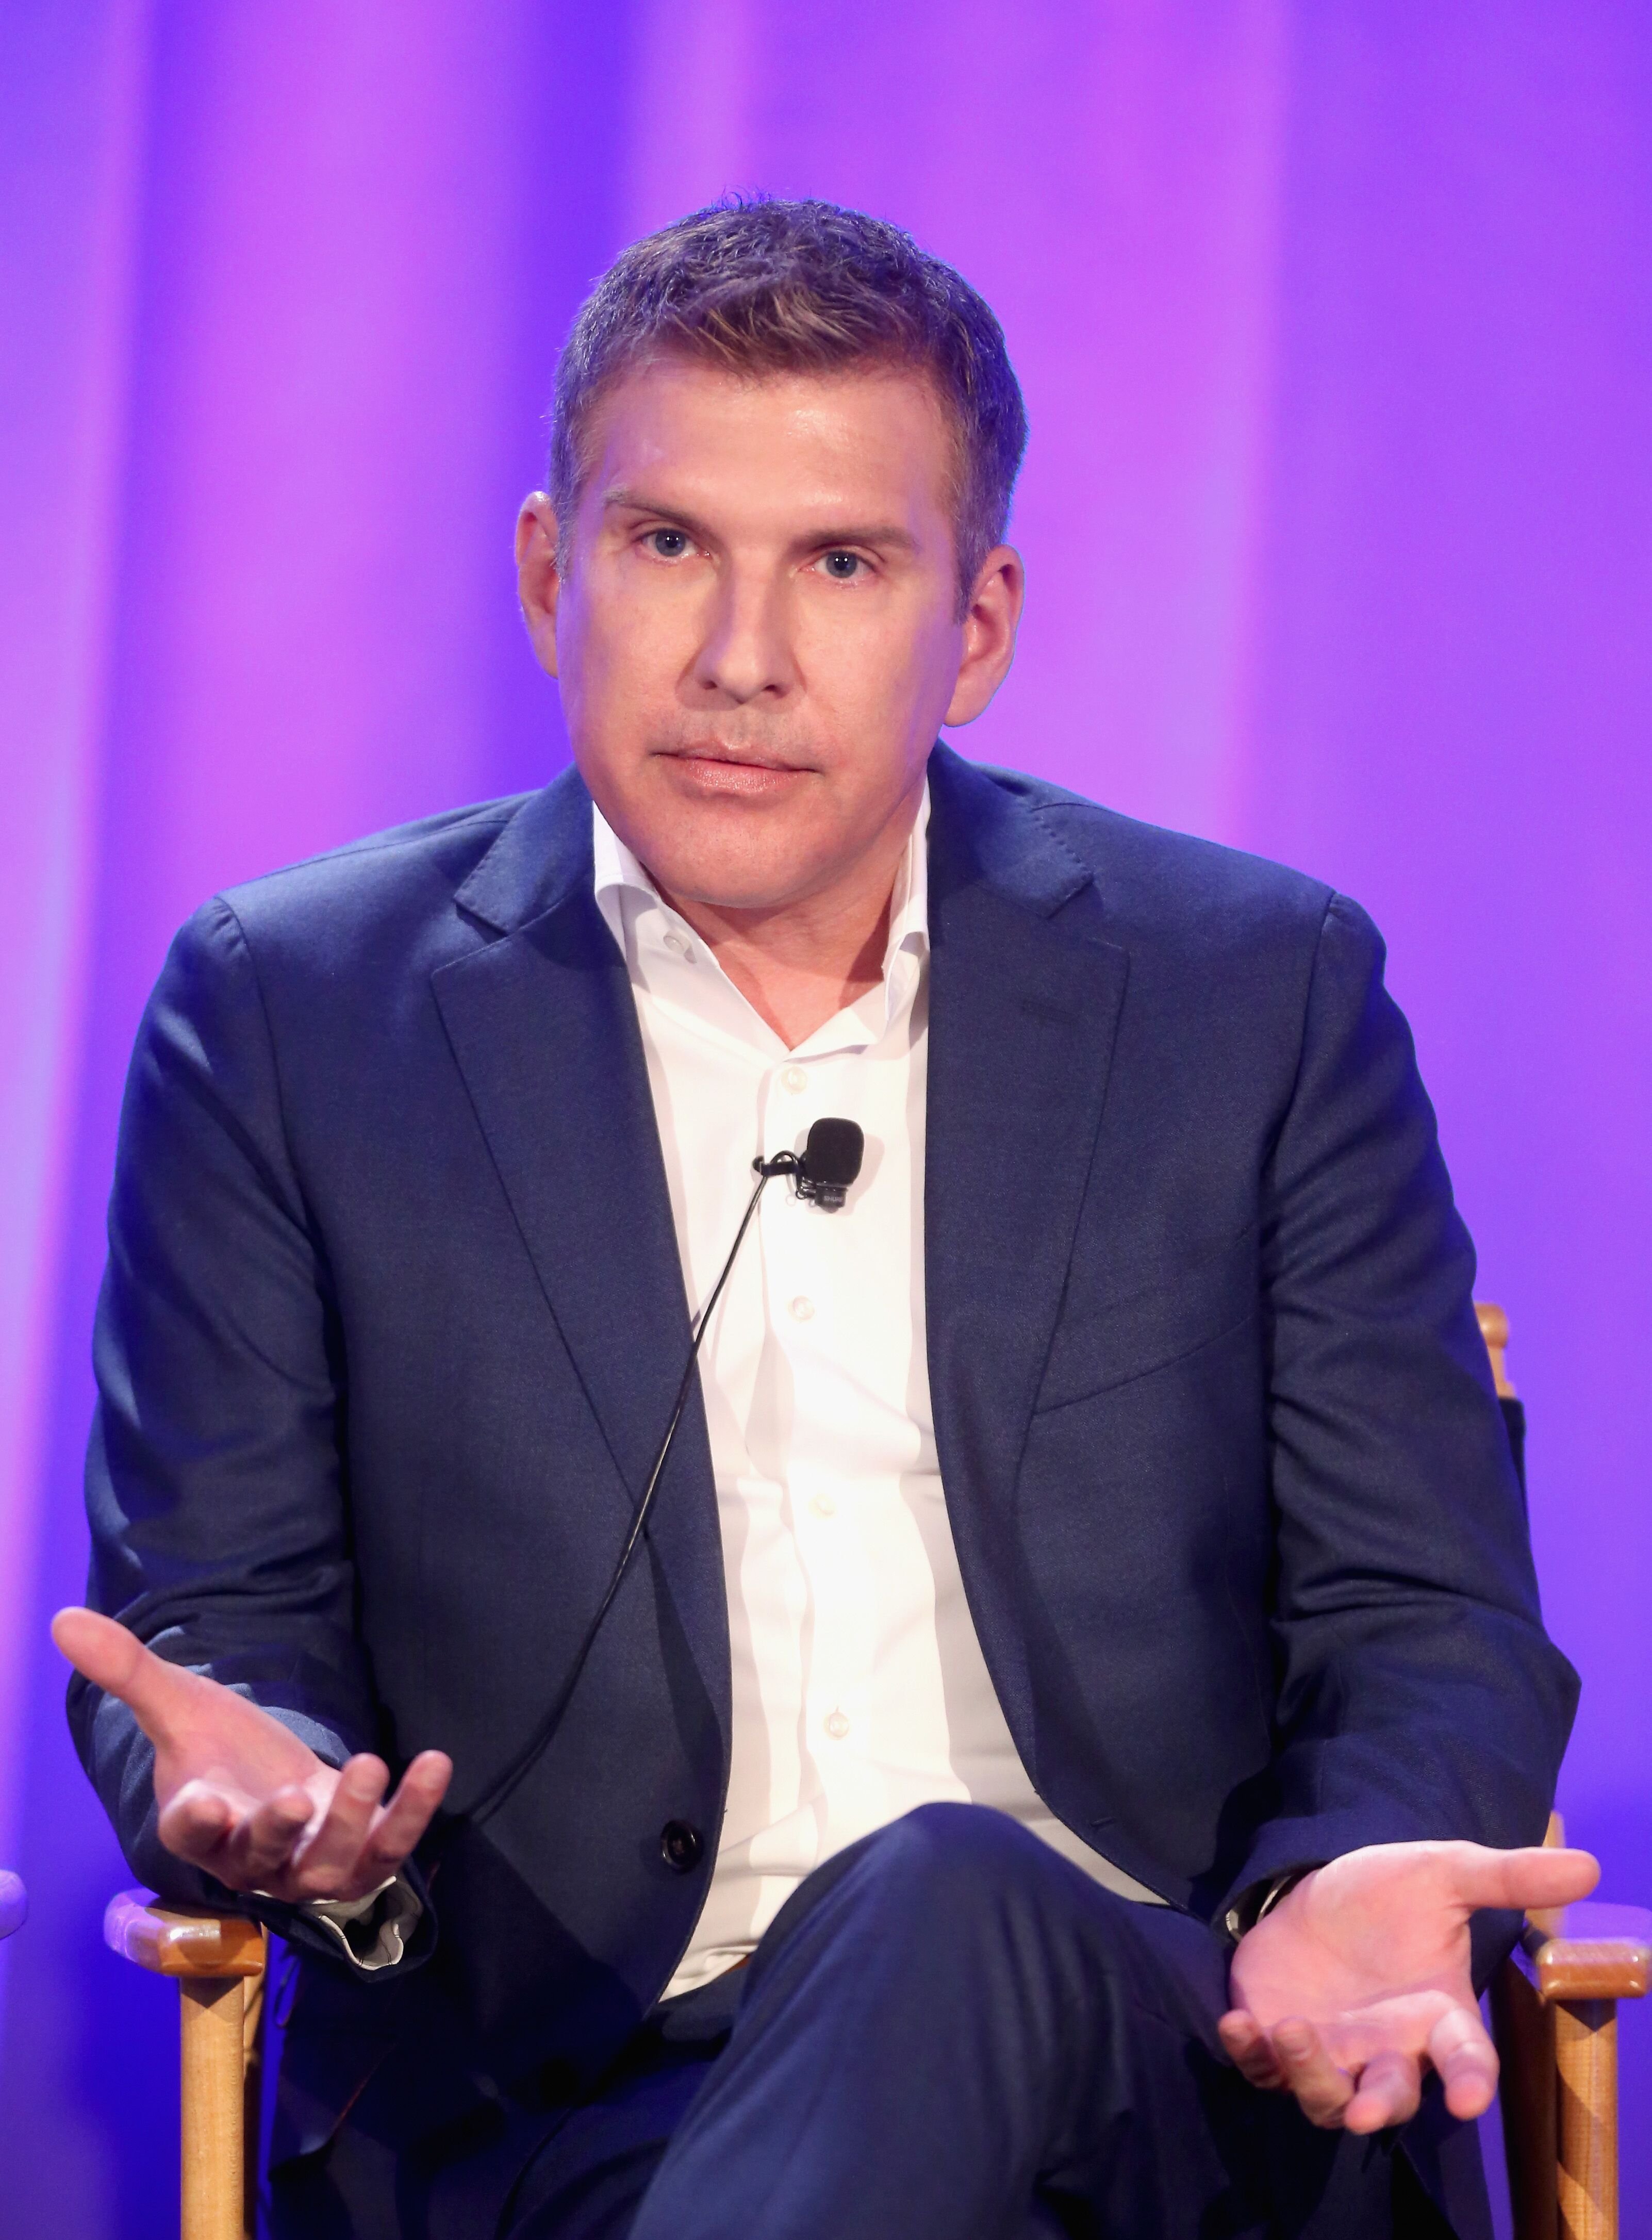 Todd Chrisley speaking before an audience | Source: Getty Images